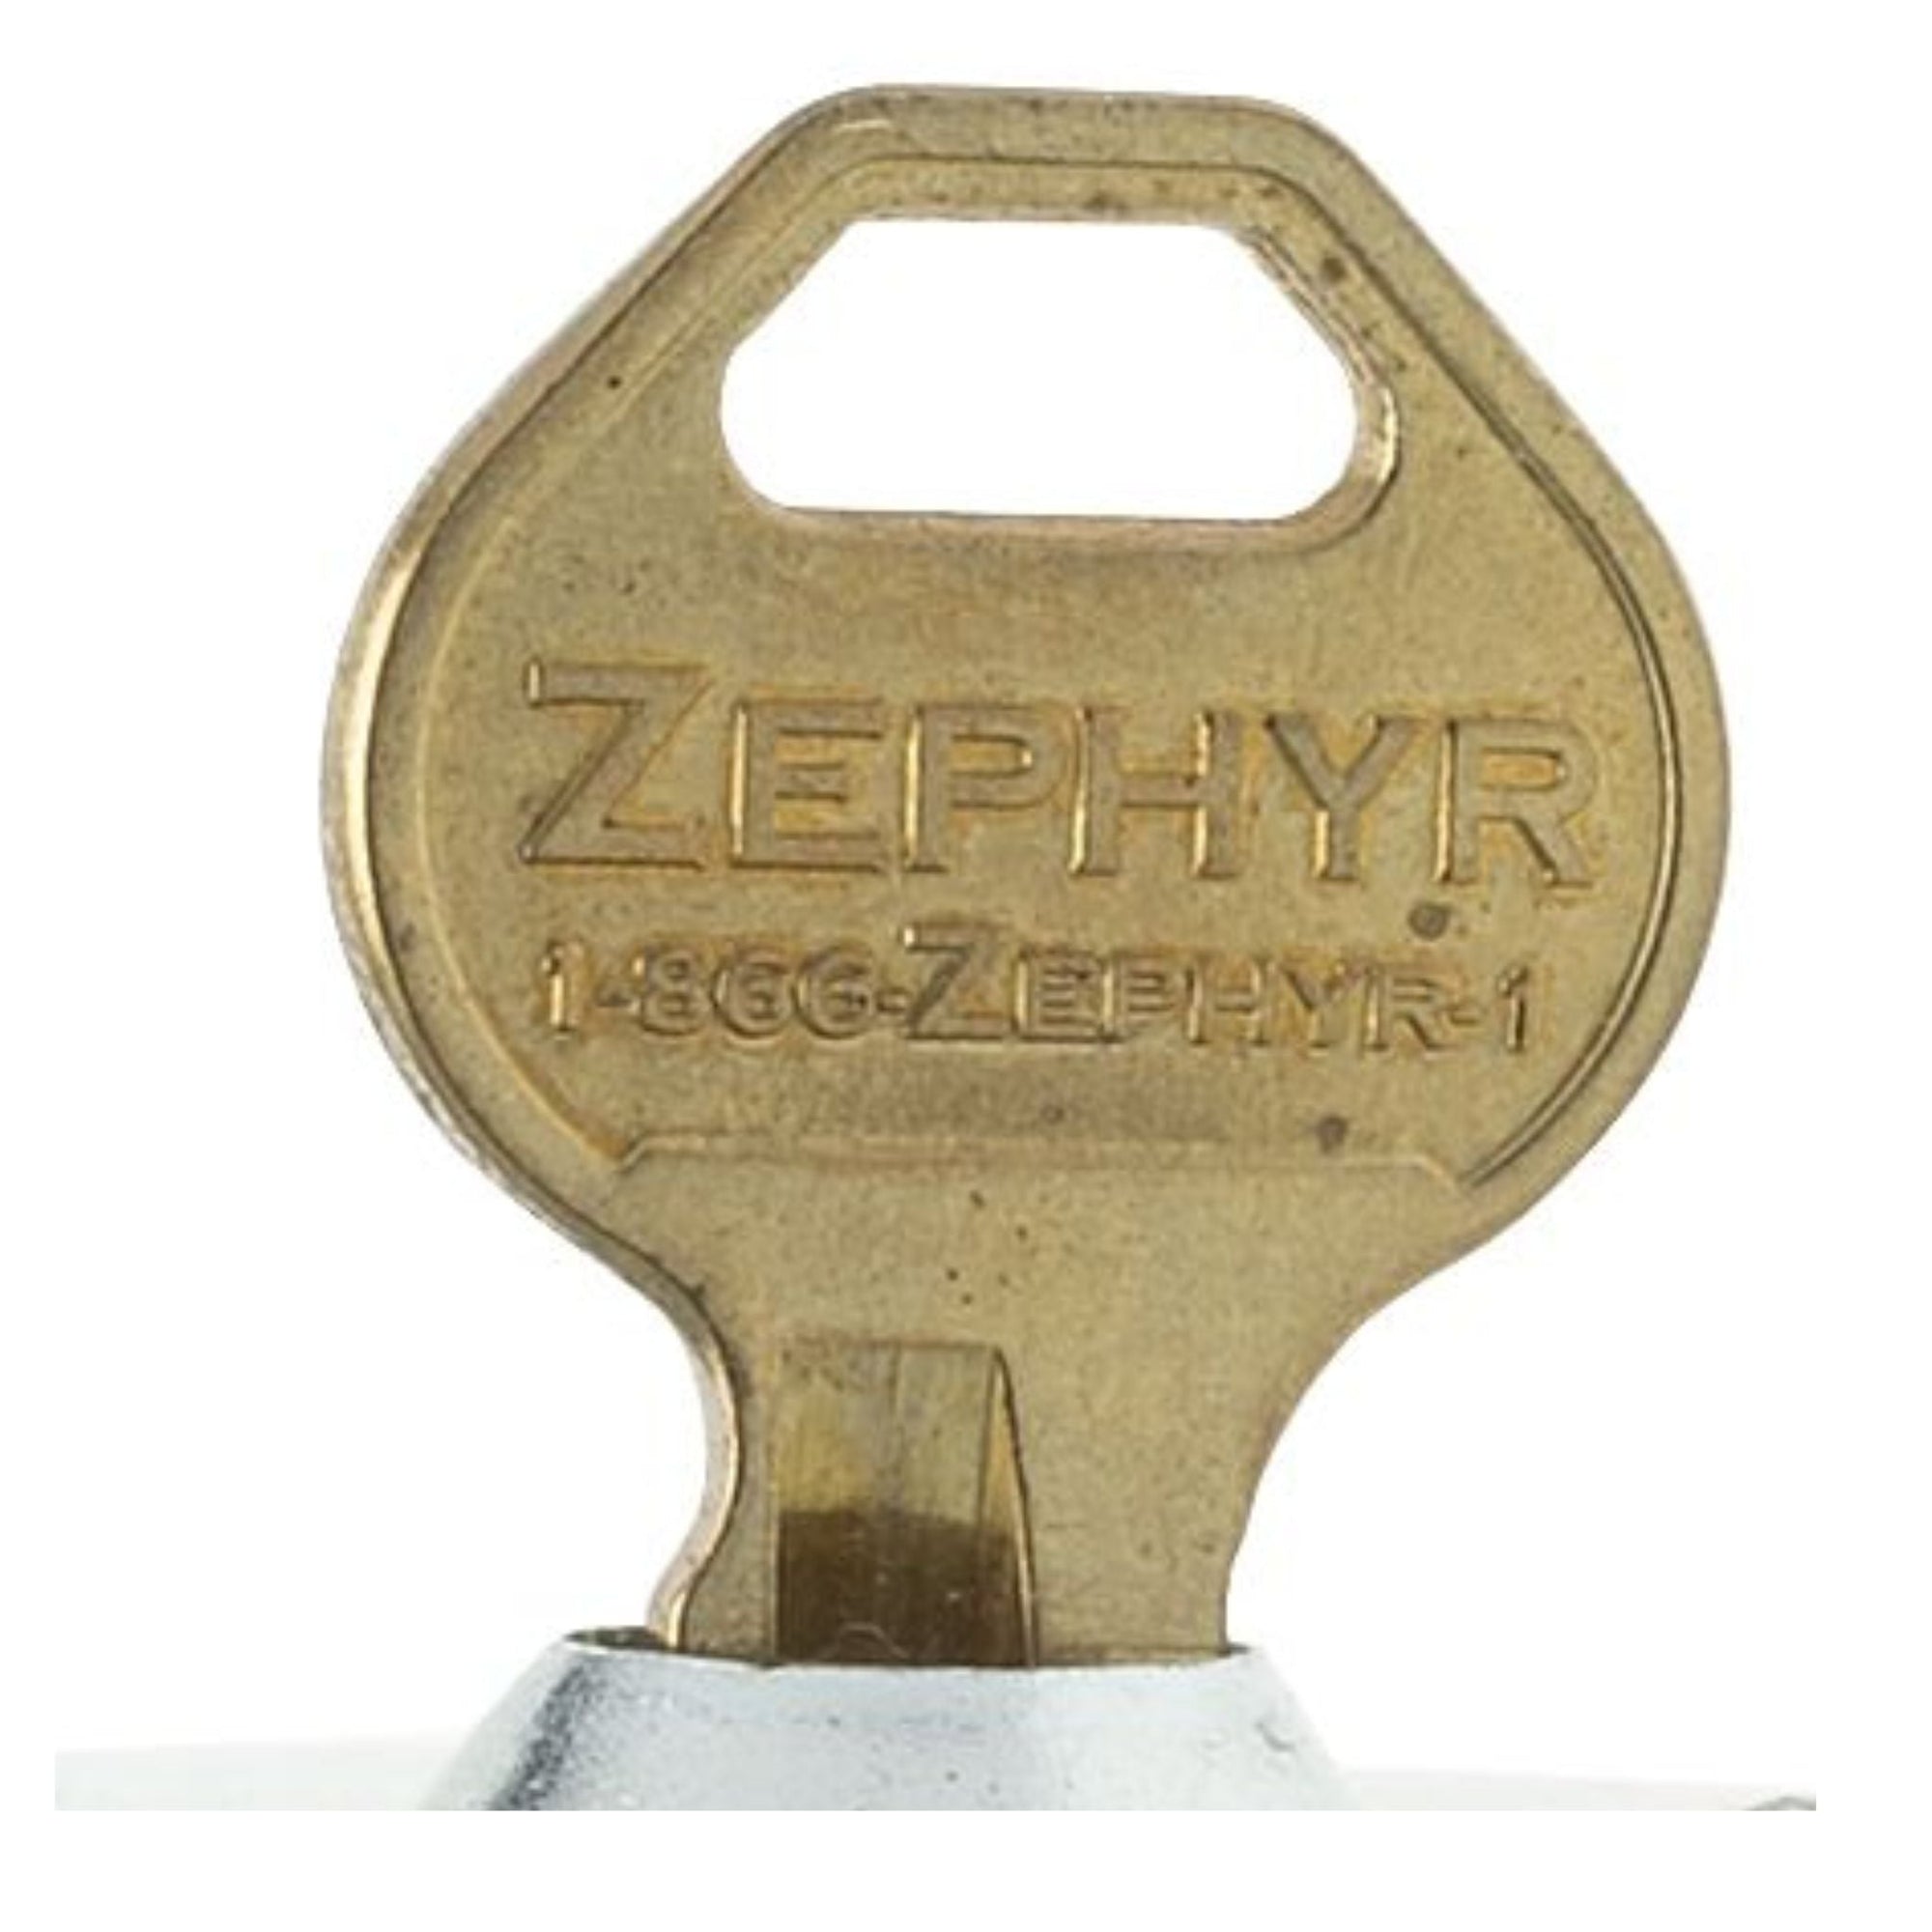 Zephyr Control Key for 1930 and 1931 Series Built In Combination Locker Locks with Vertical Dead Bolts - The Lock Source